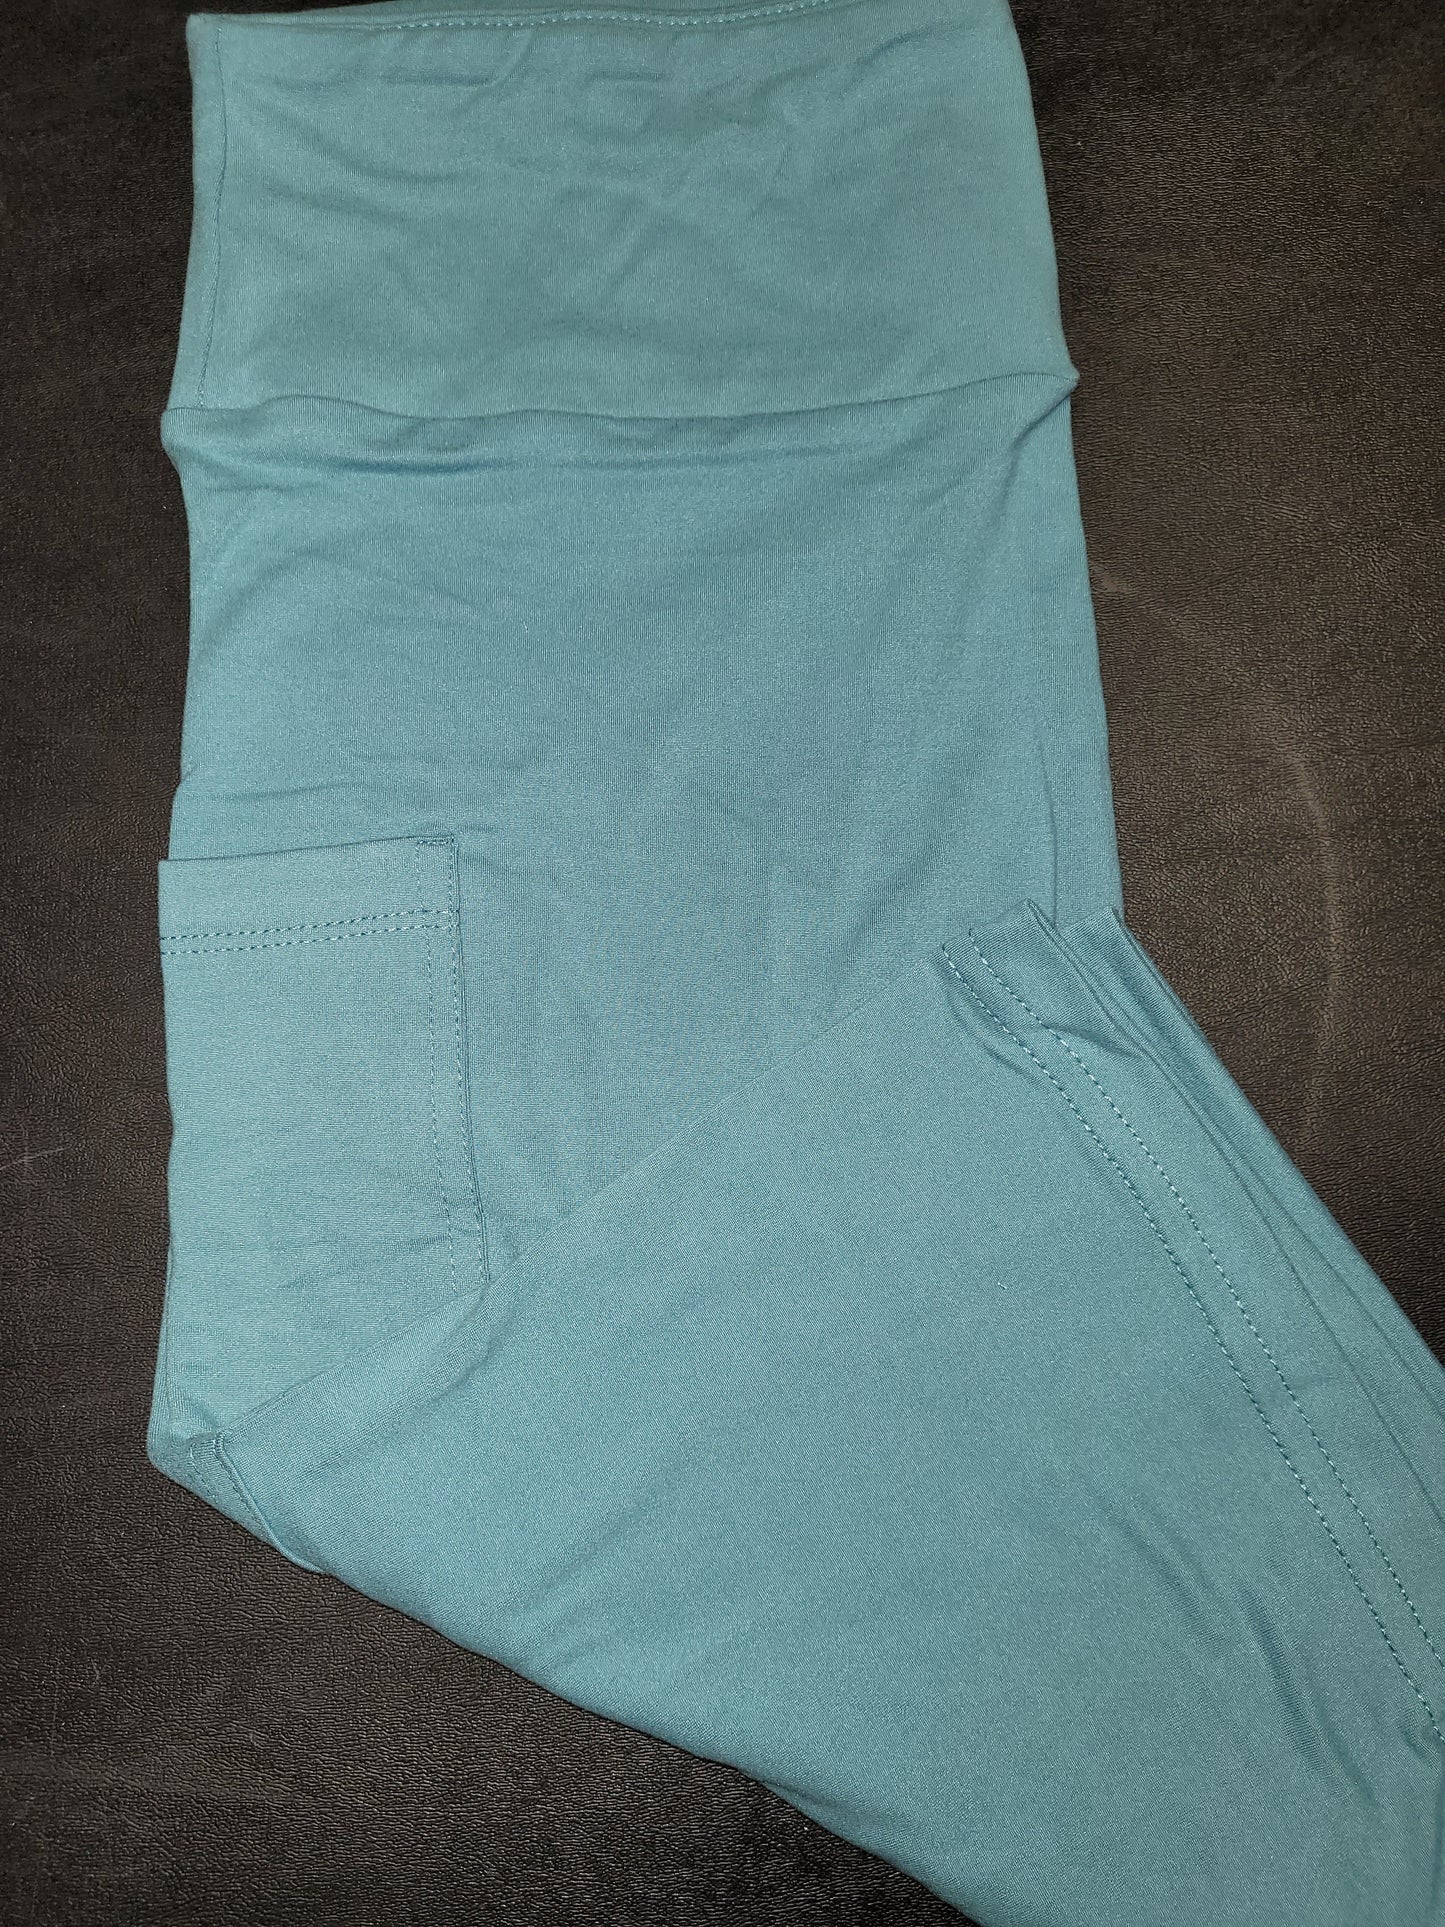 Sea Blue Capris and Shorts with pockets